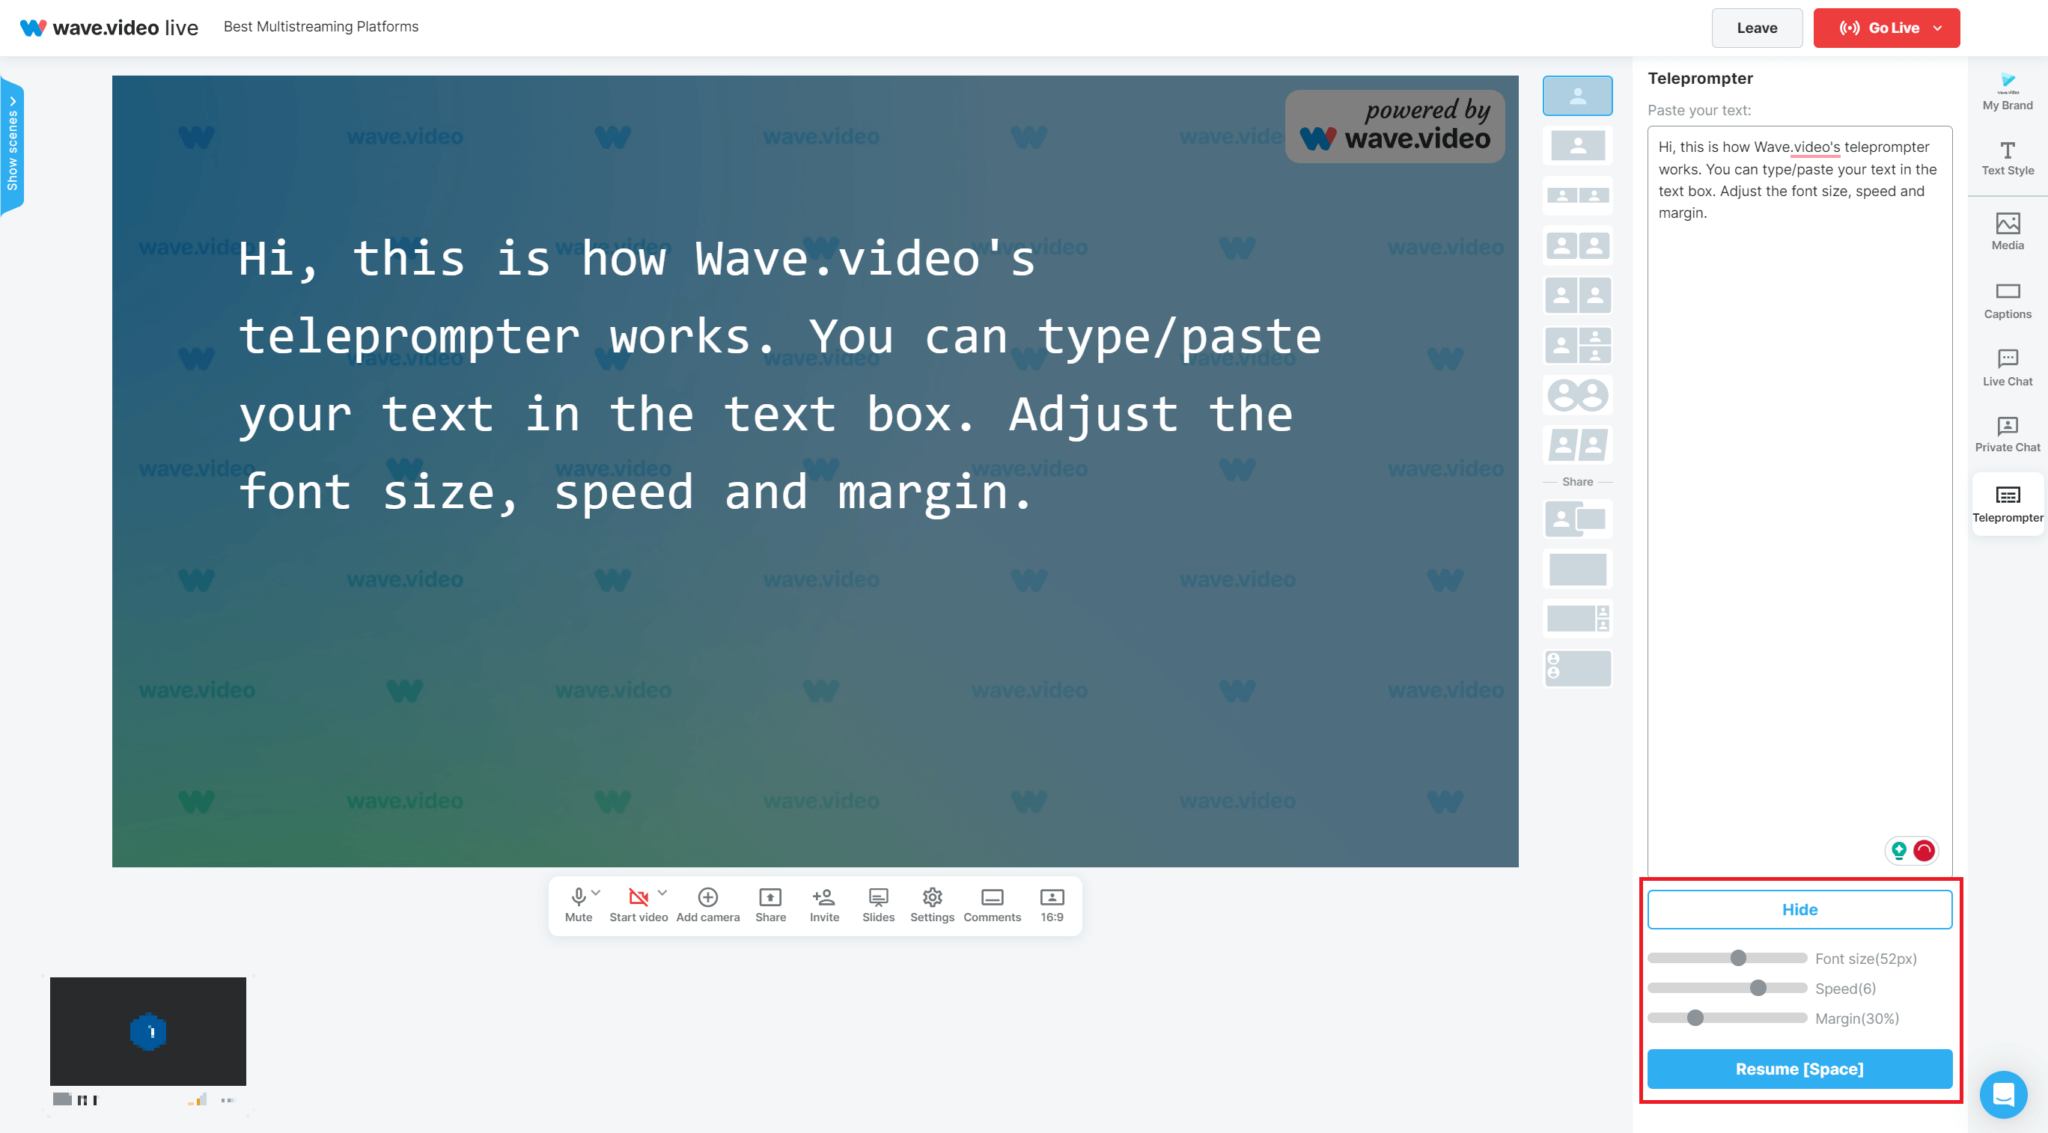 Wave.video Teleprompter